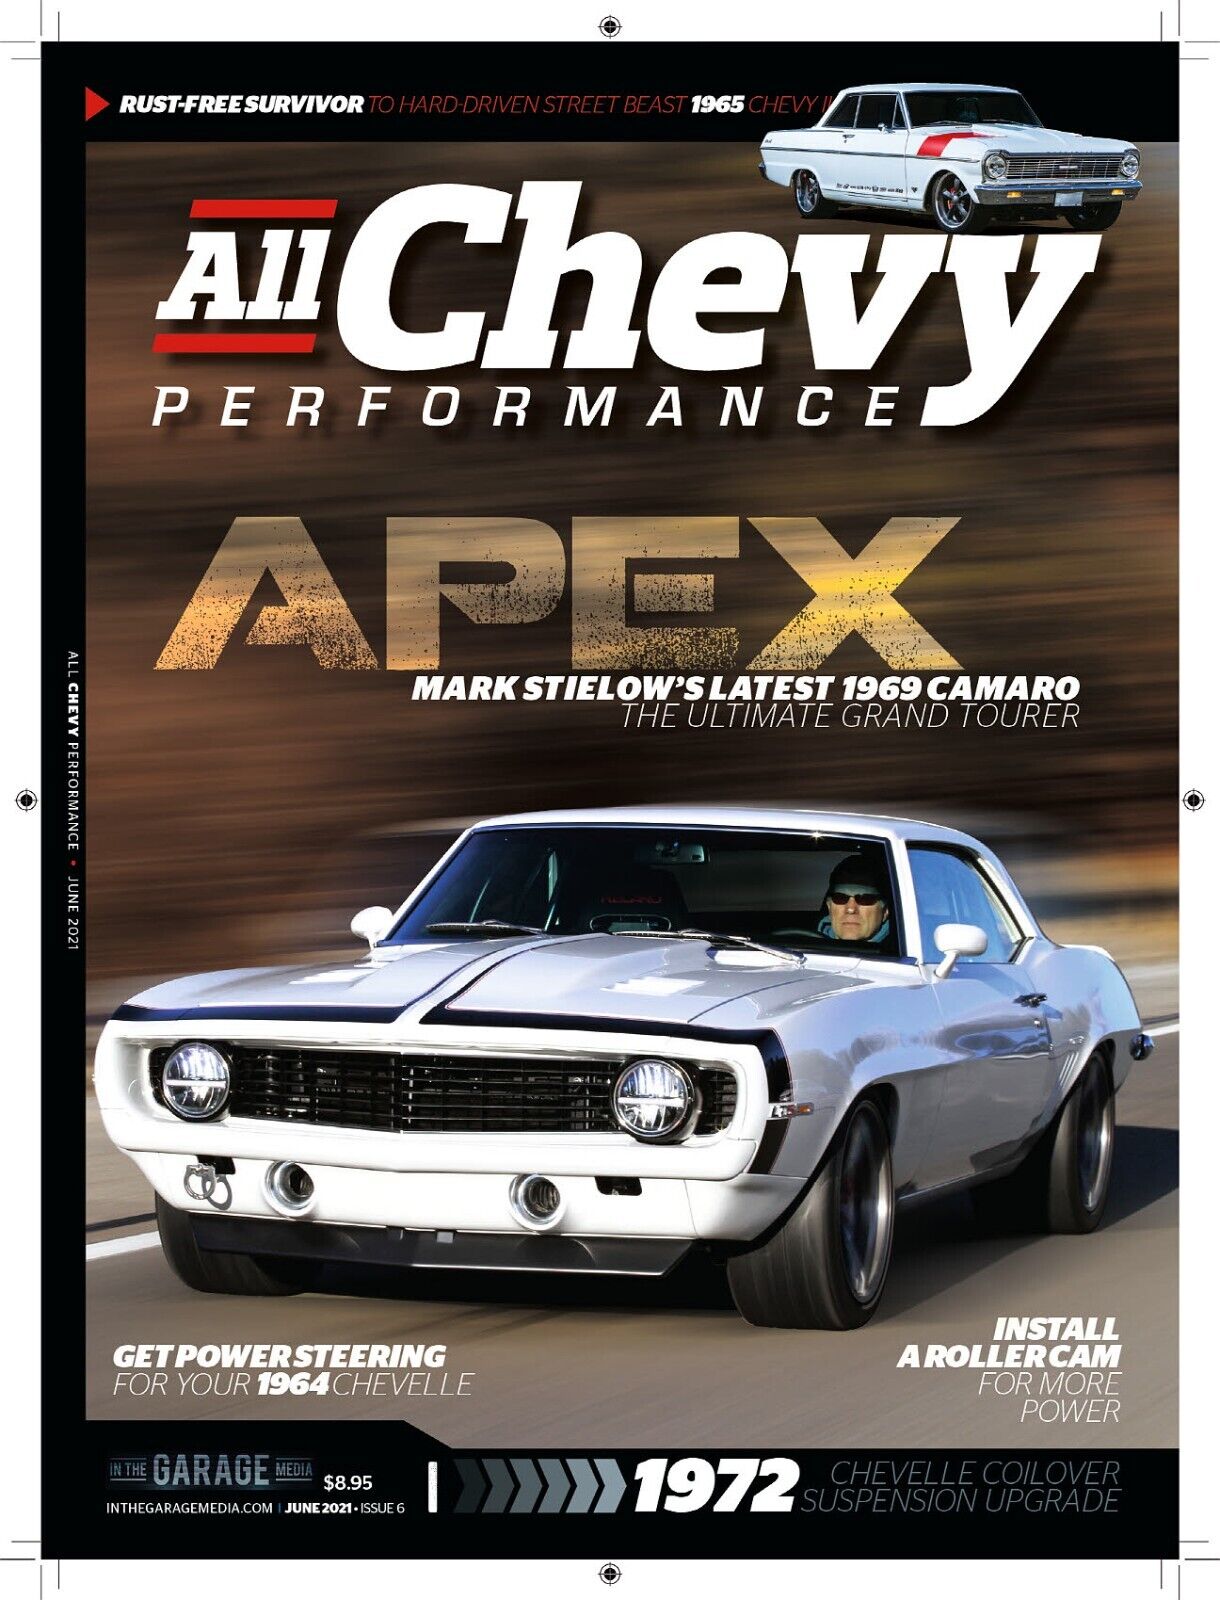 All Chevy Performance Magazine Issue #6 June 2021 - New